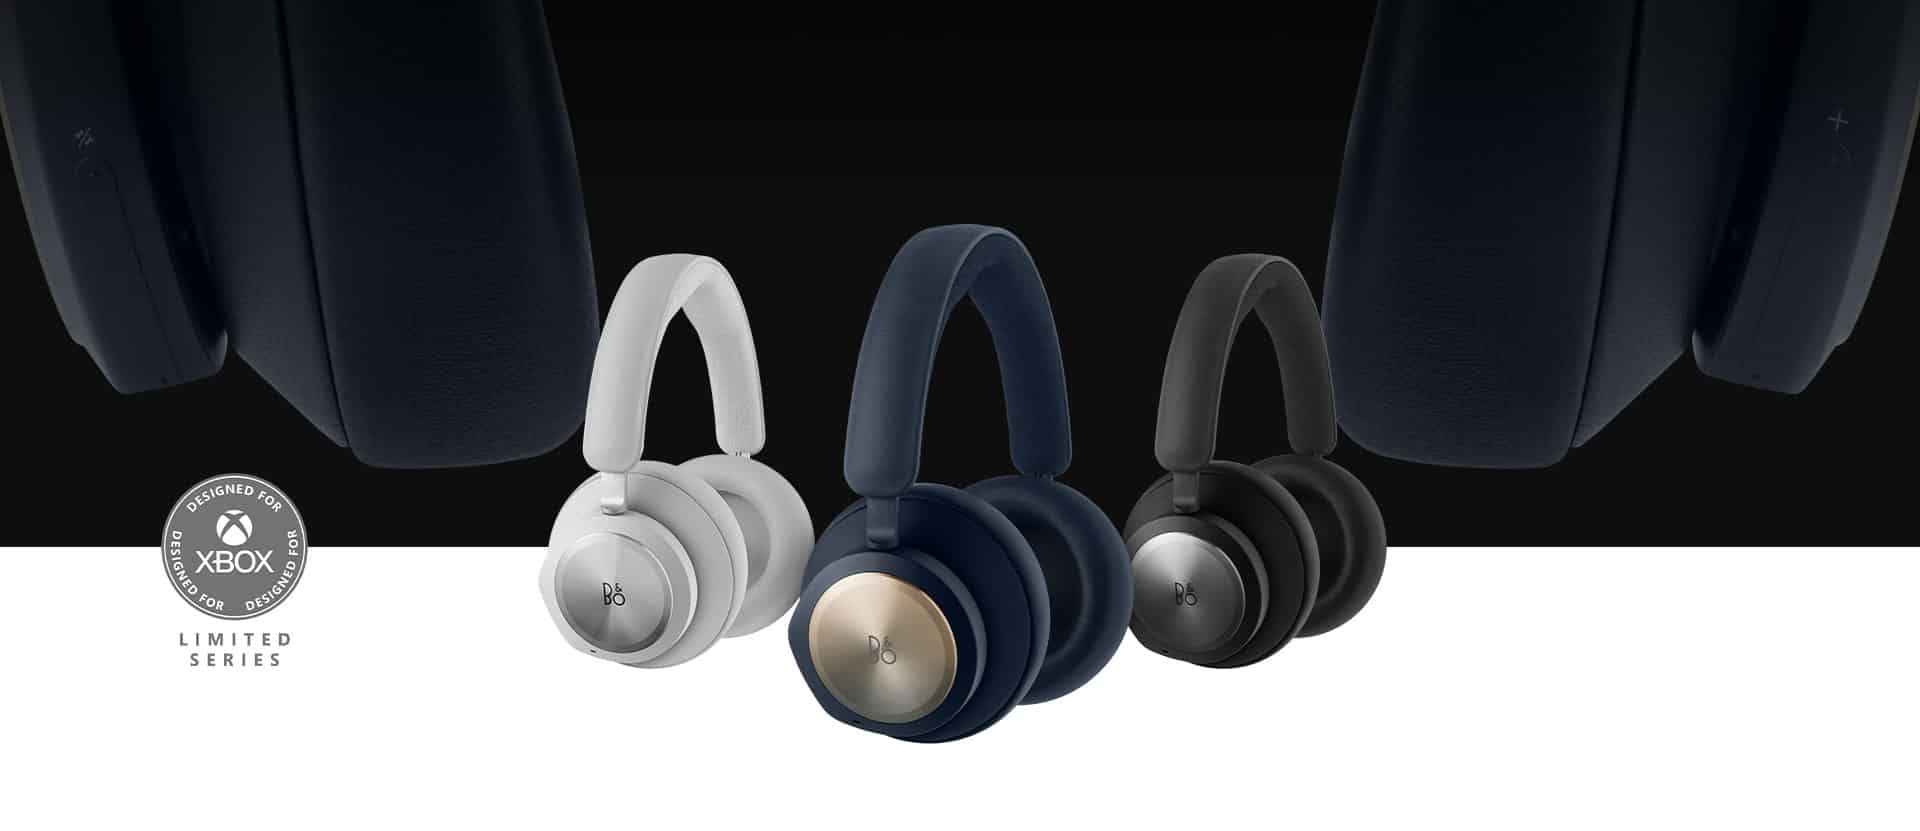 Today Only Get Half Off the Bang & Olufsen Beoplay Portal 1